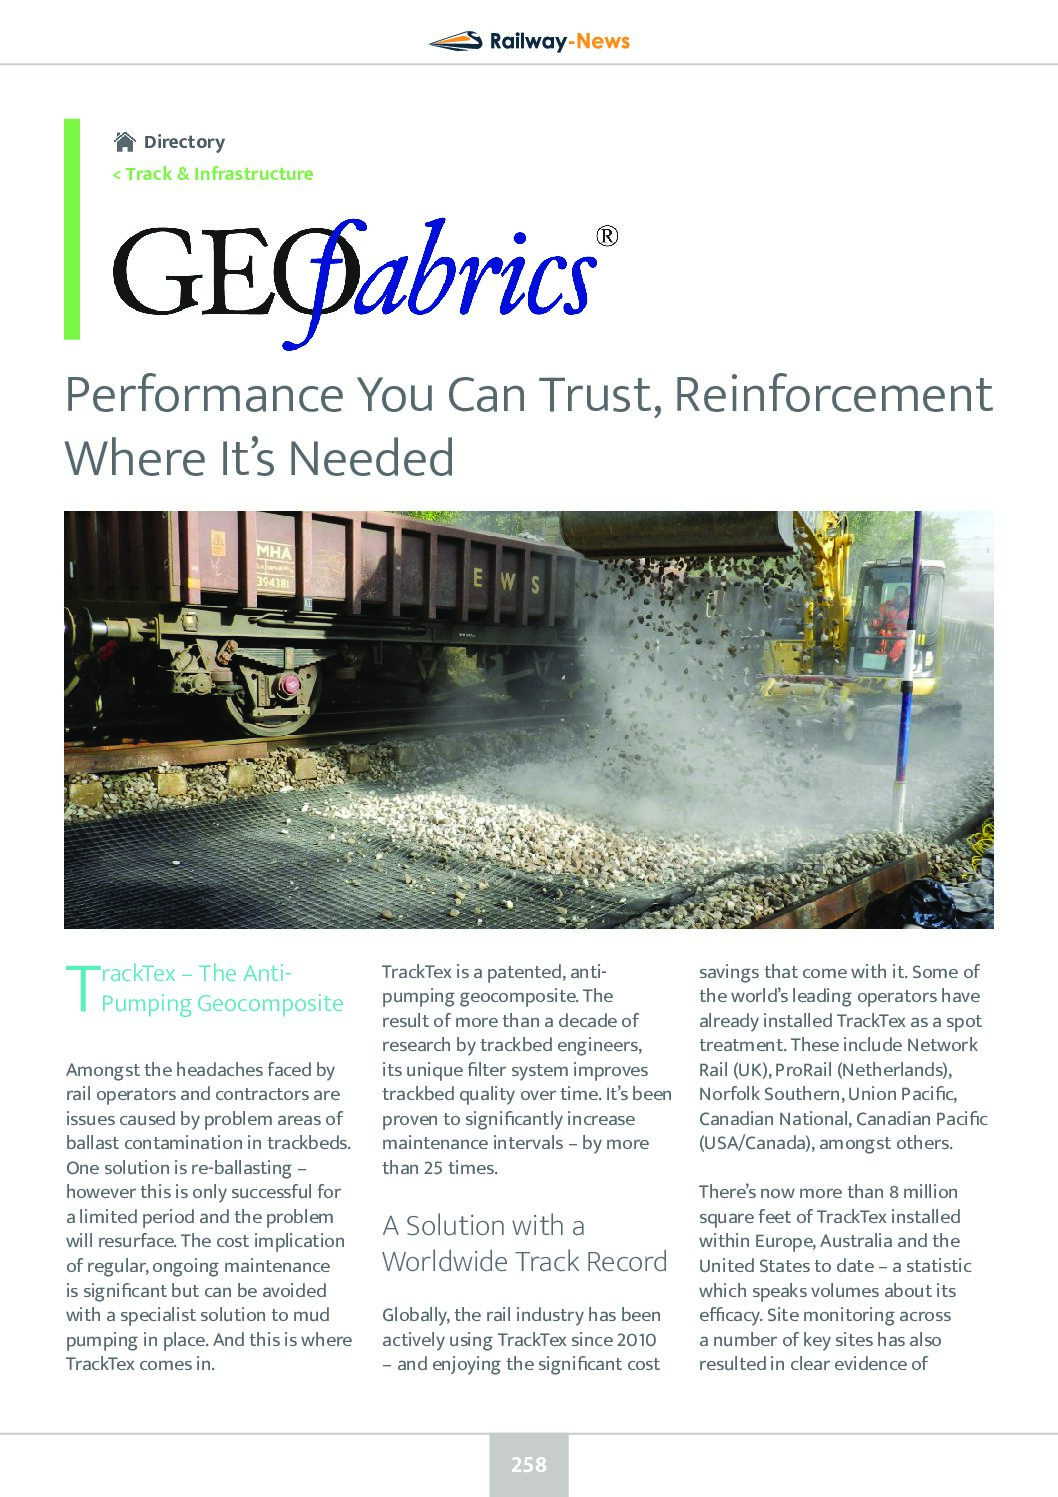 Performance You Can Trust, Reinforcement Where It’s Needed